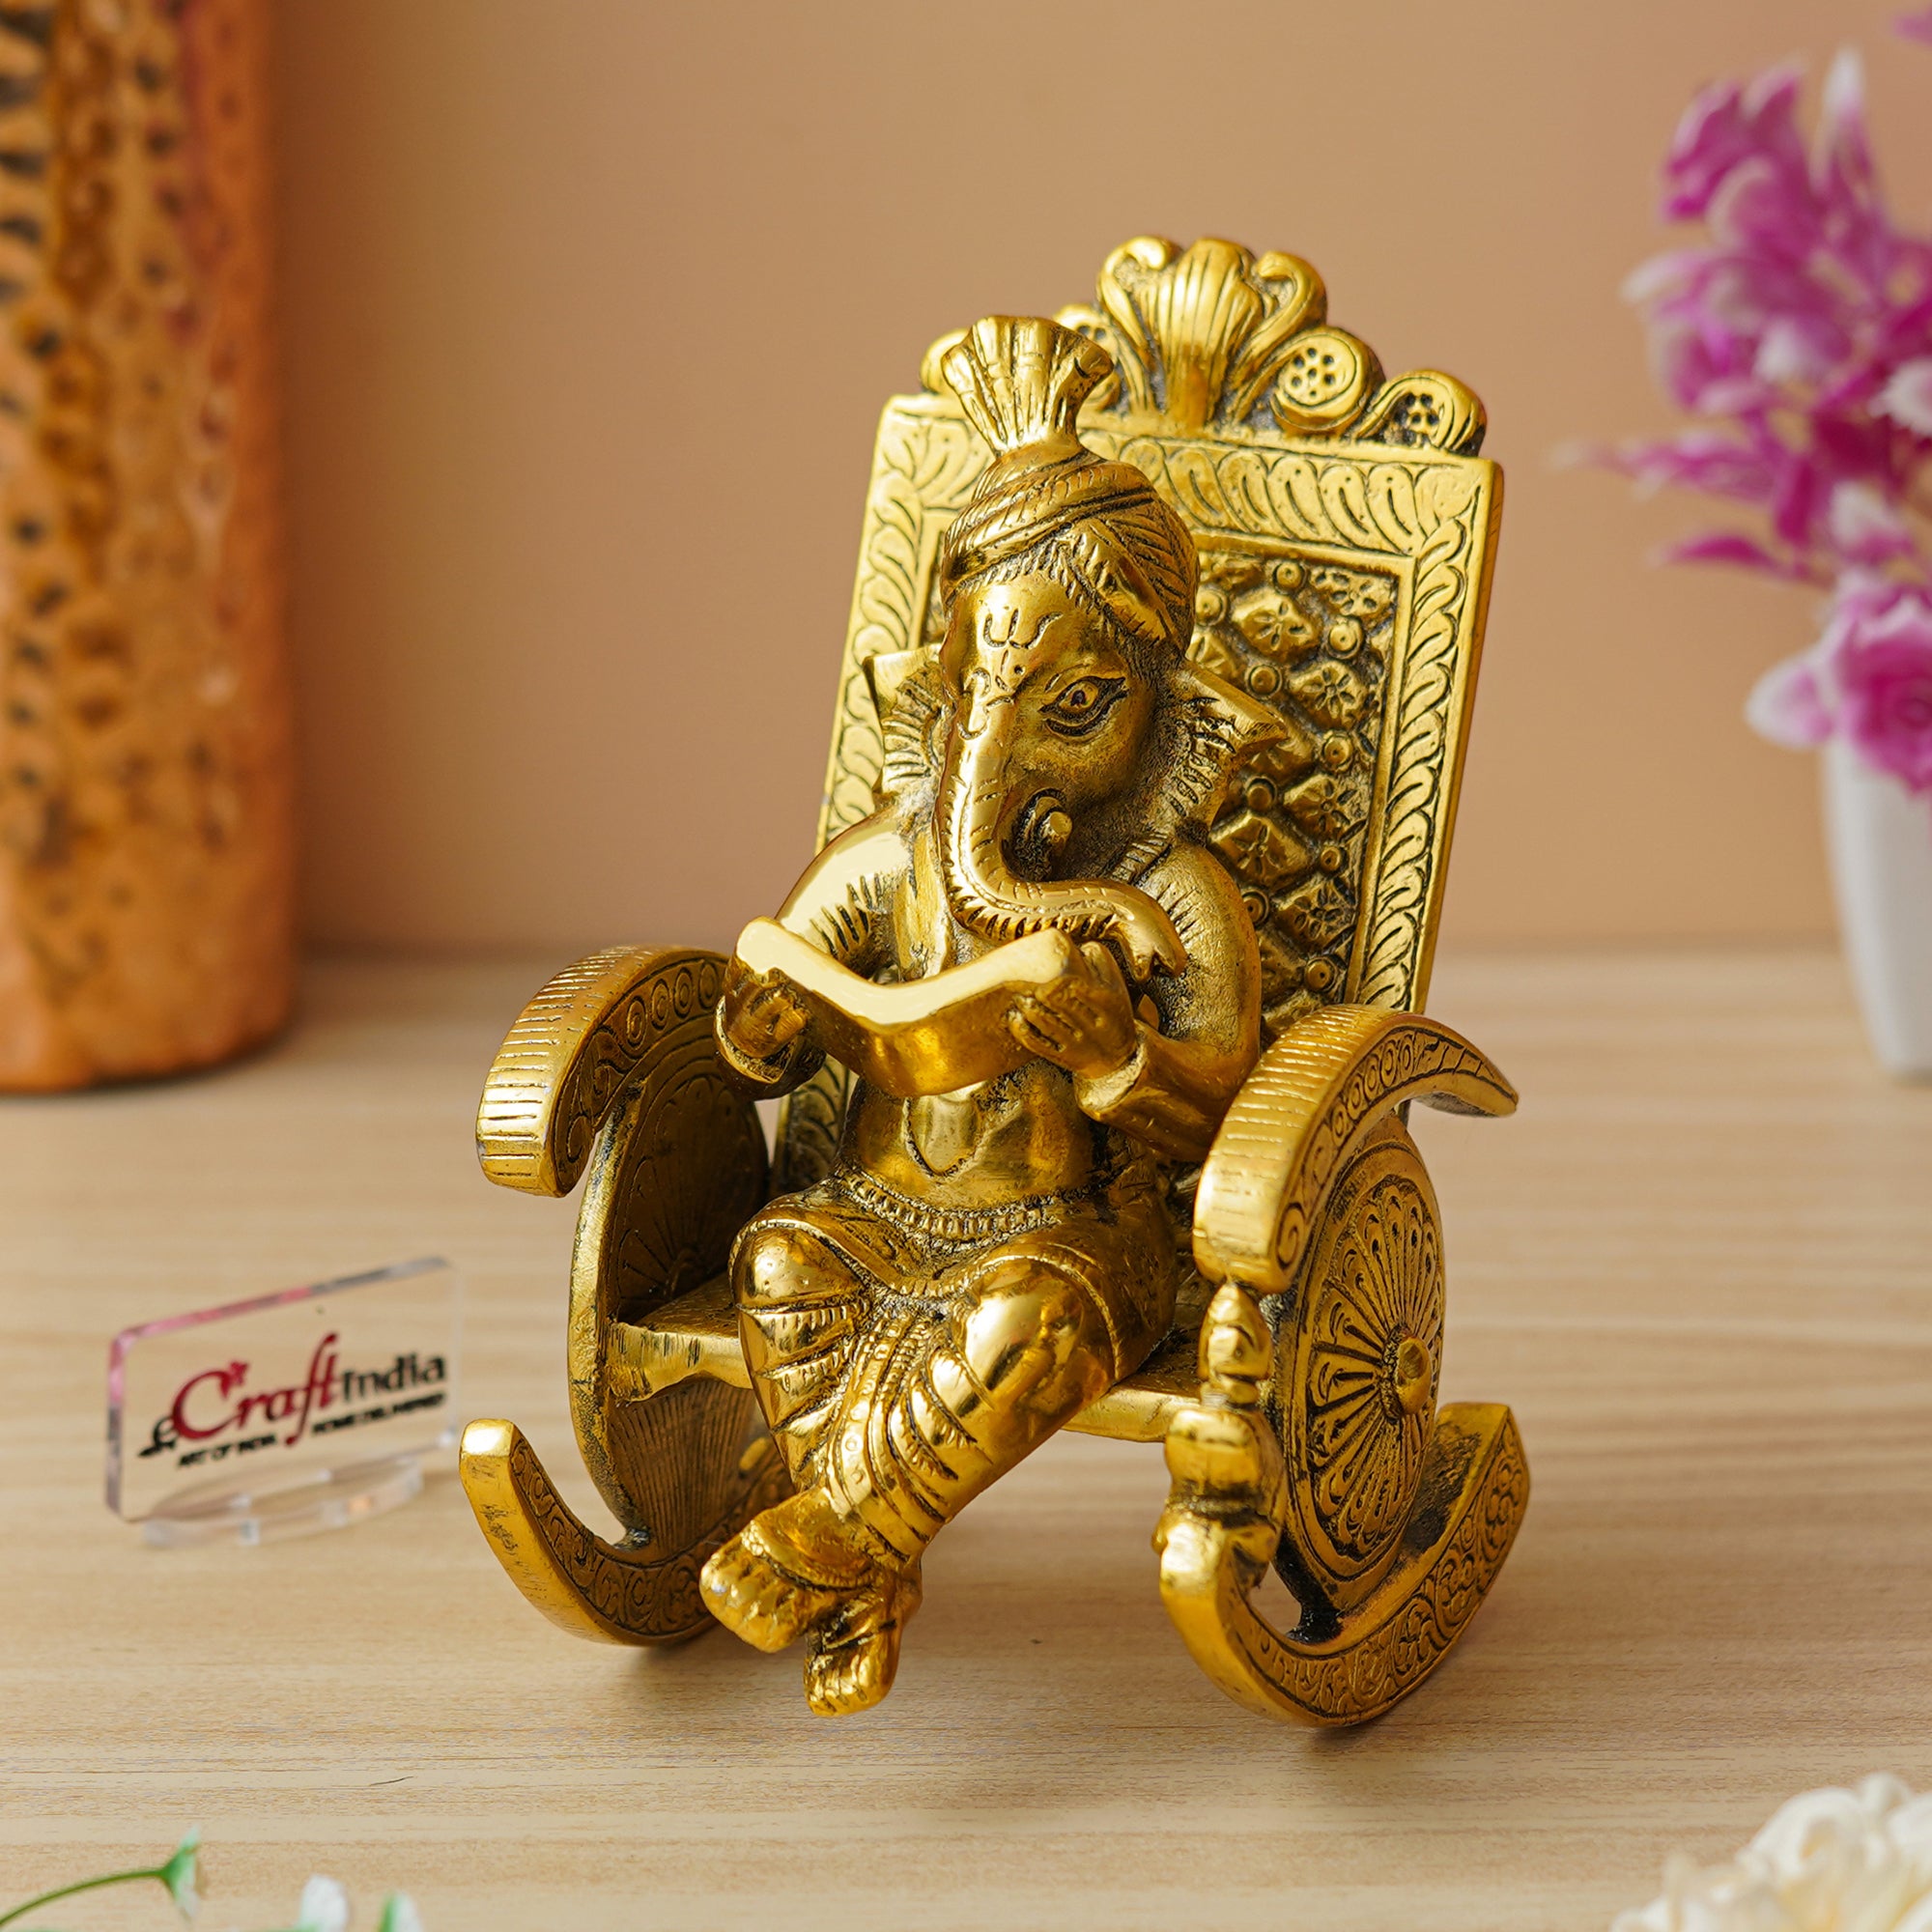 Golden Metal Handcrafted Lord Ganesha Idol Reading Book on Rocking Chair